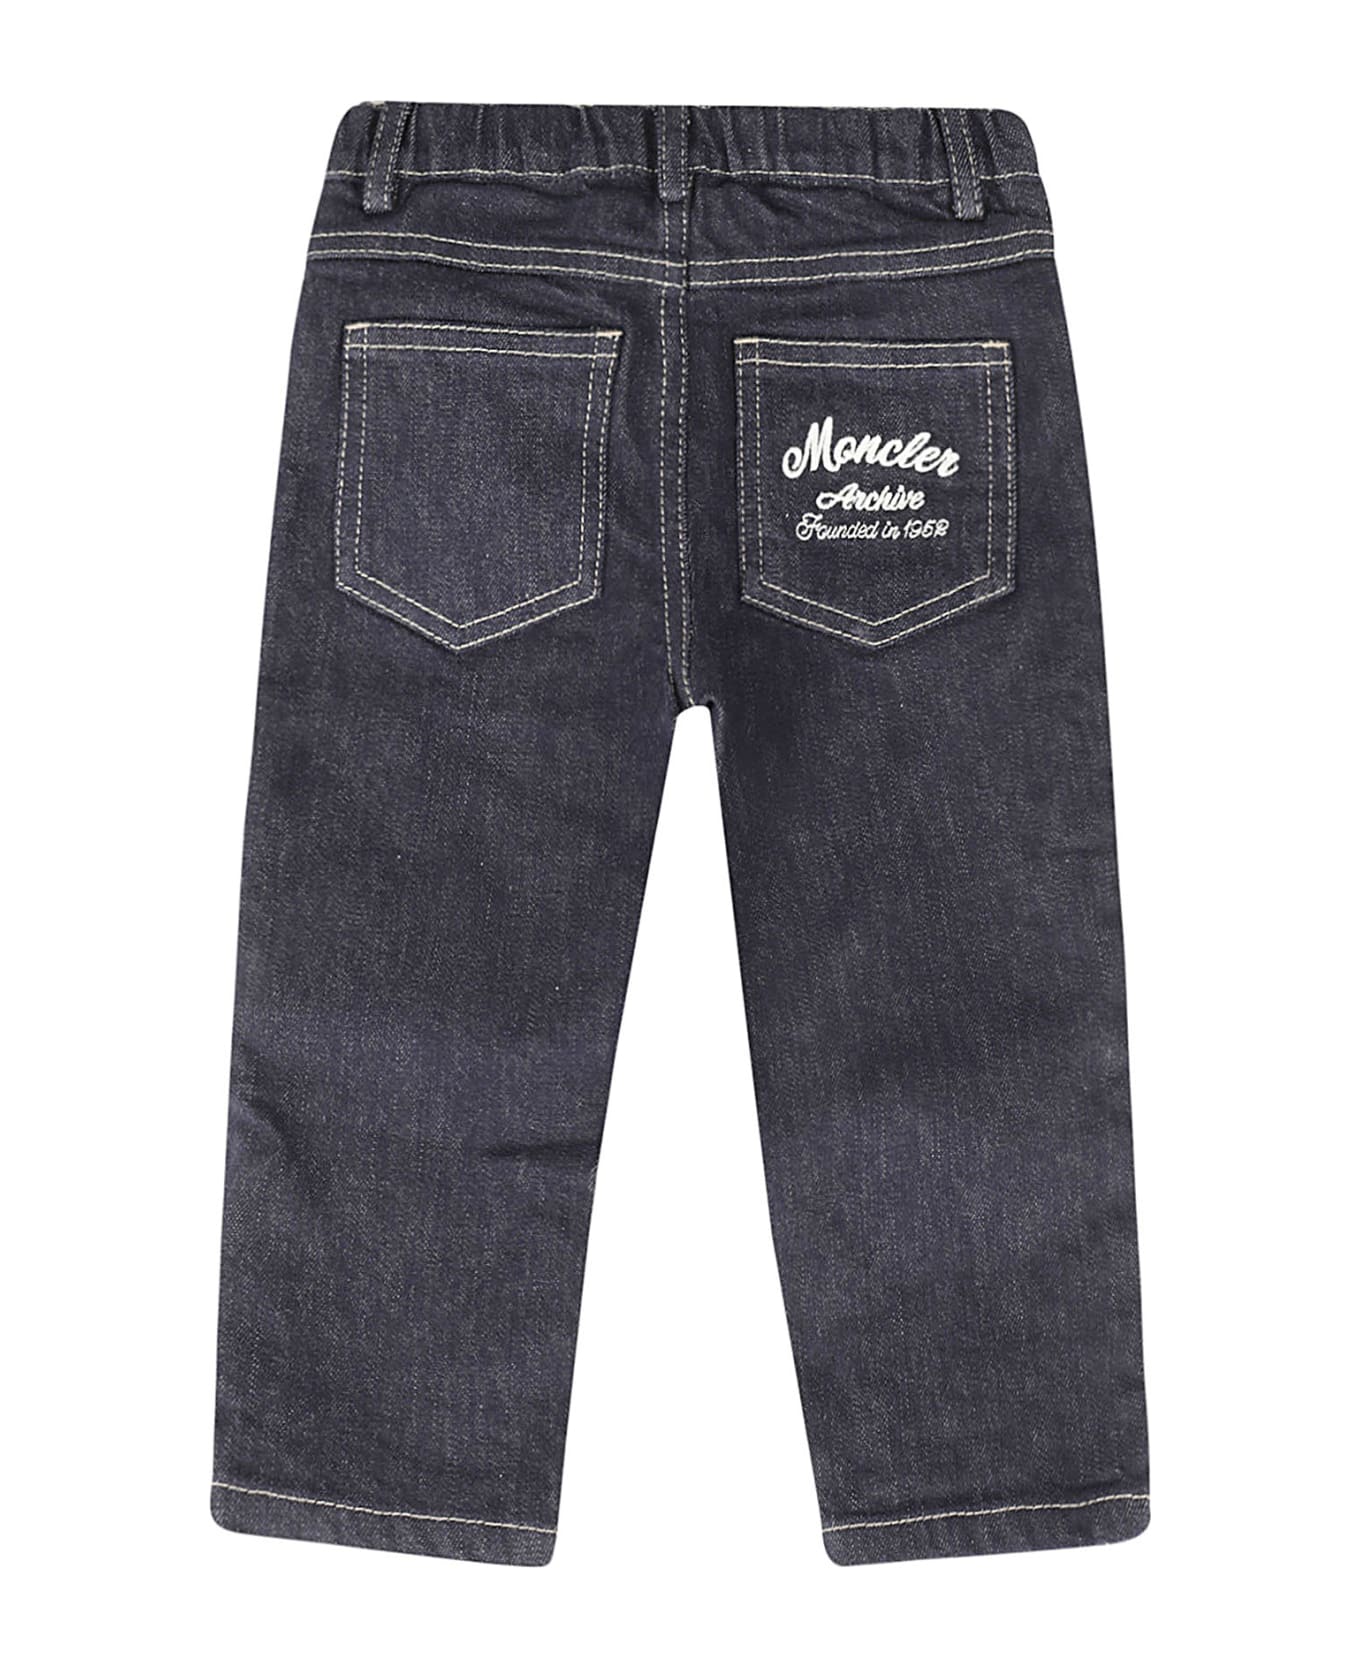 Moncler Trousers - Navy ボトムス